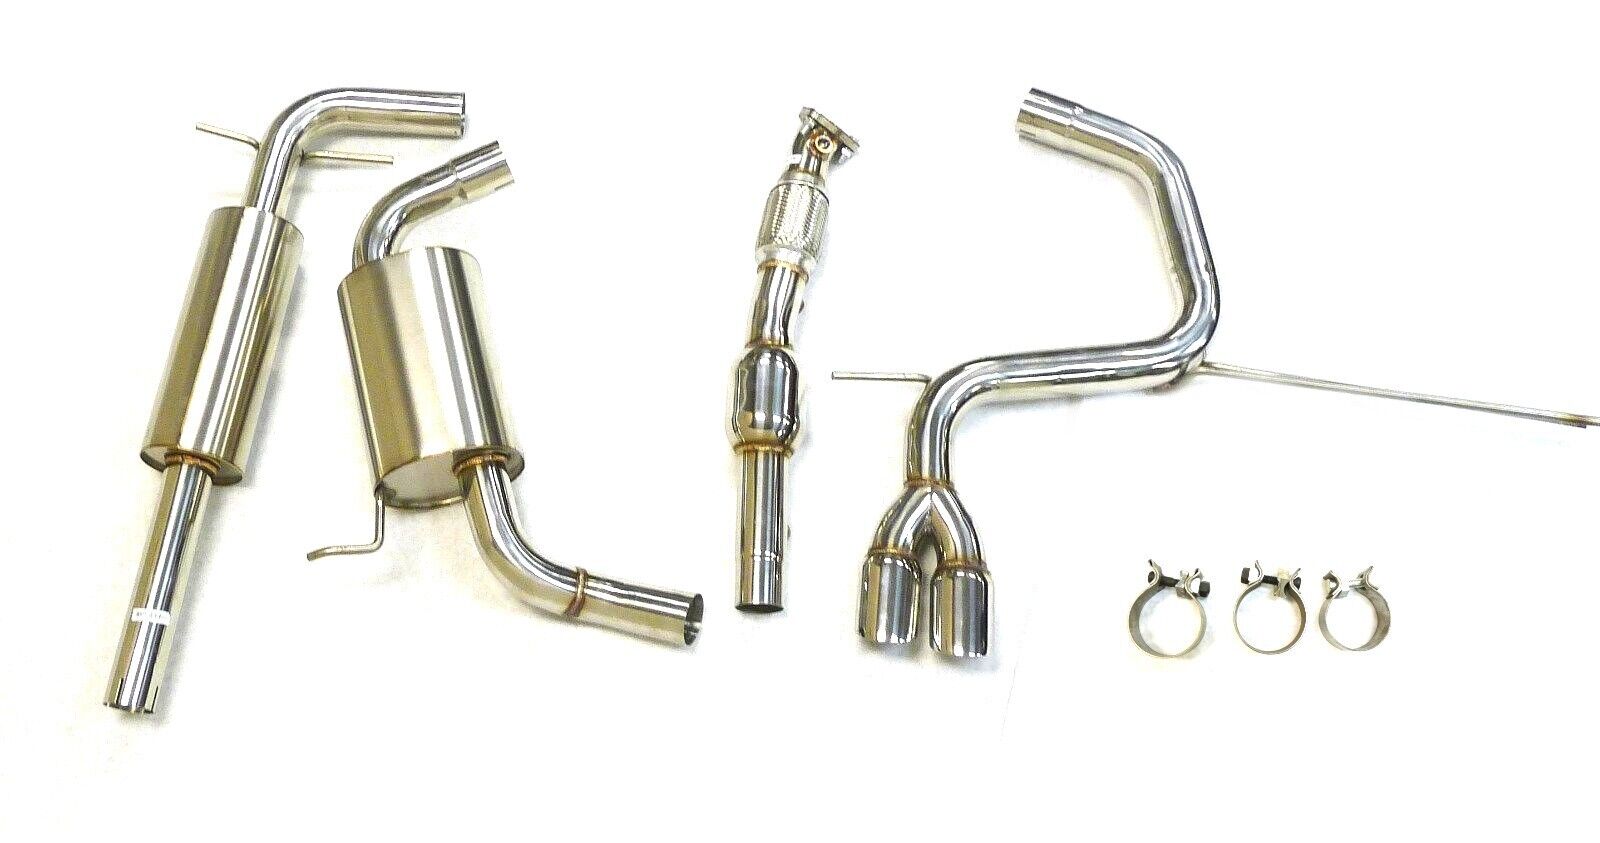 S/S Catback Exhaust System Compatible W/ 06-14 VW Rabbit 2.5L Only By Becker